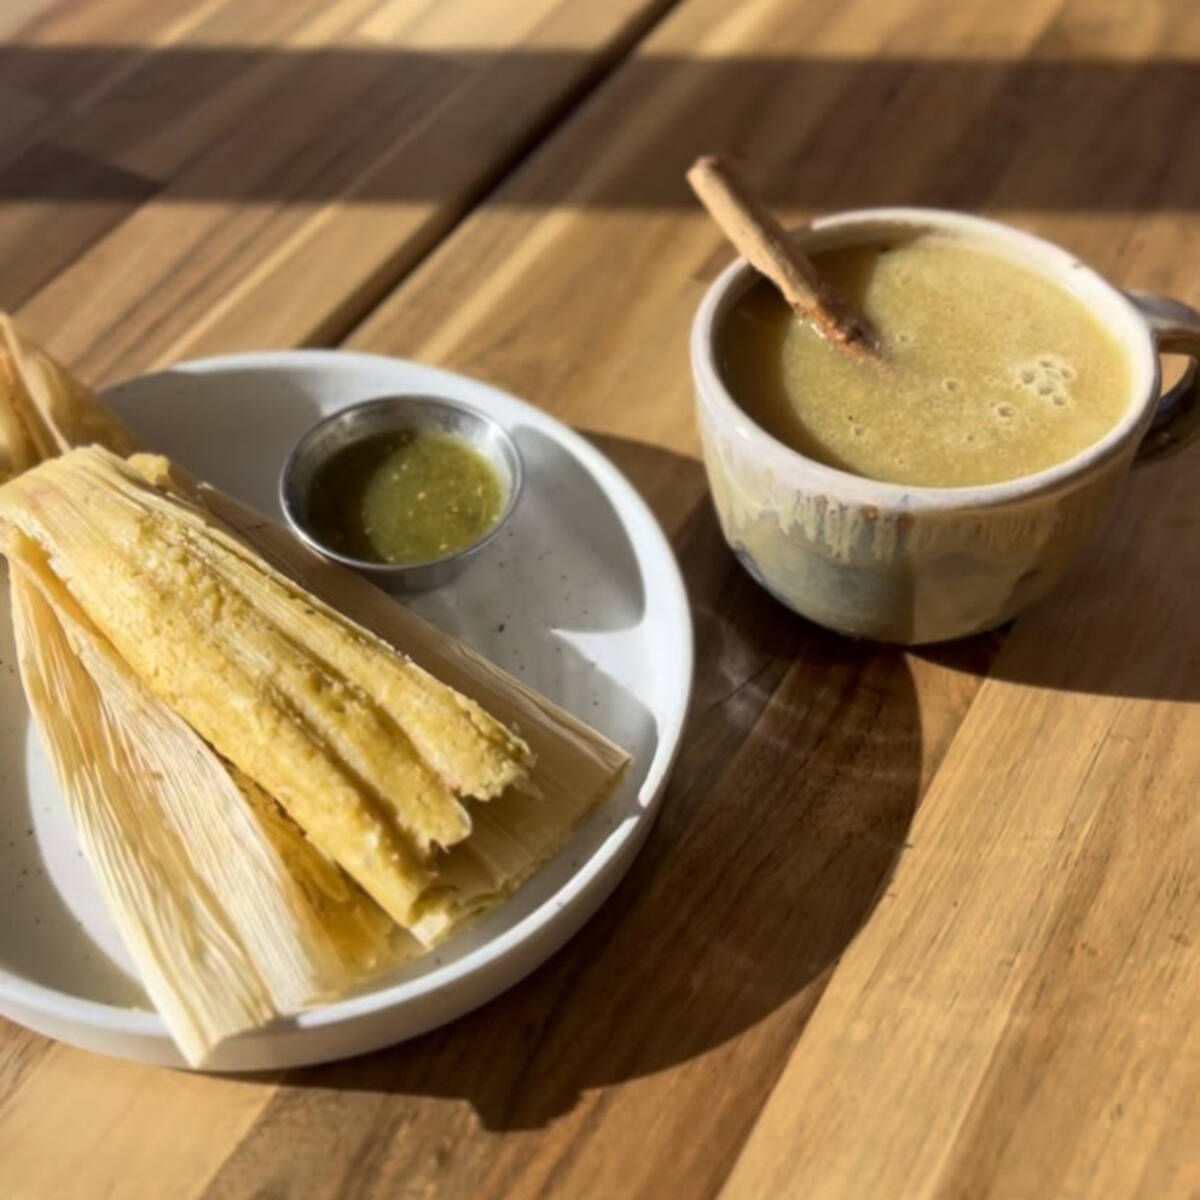 Tamales fashioned with housemade masa and atole hot corn drink are two holiday specials offered ...